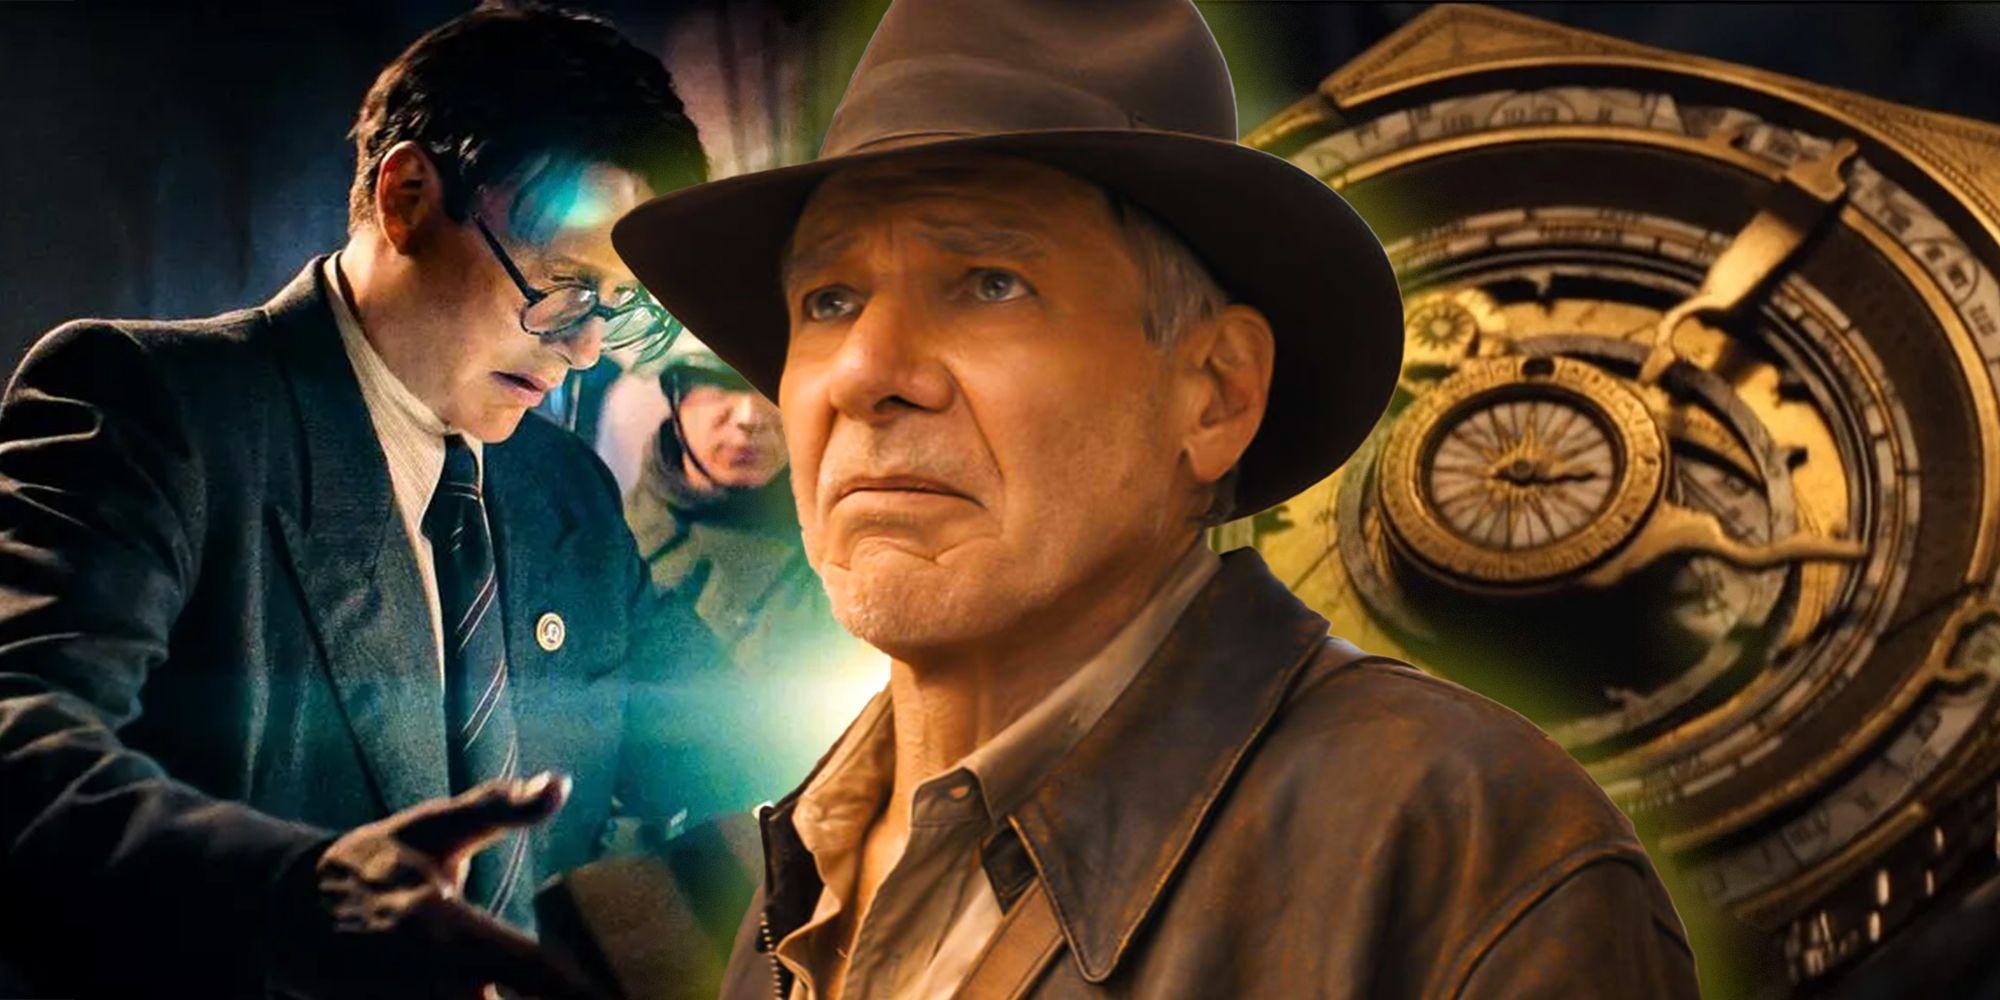 Voller, Indiana Jones, and the dial in Indiana Jones and the Dial of Destiny